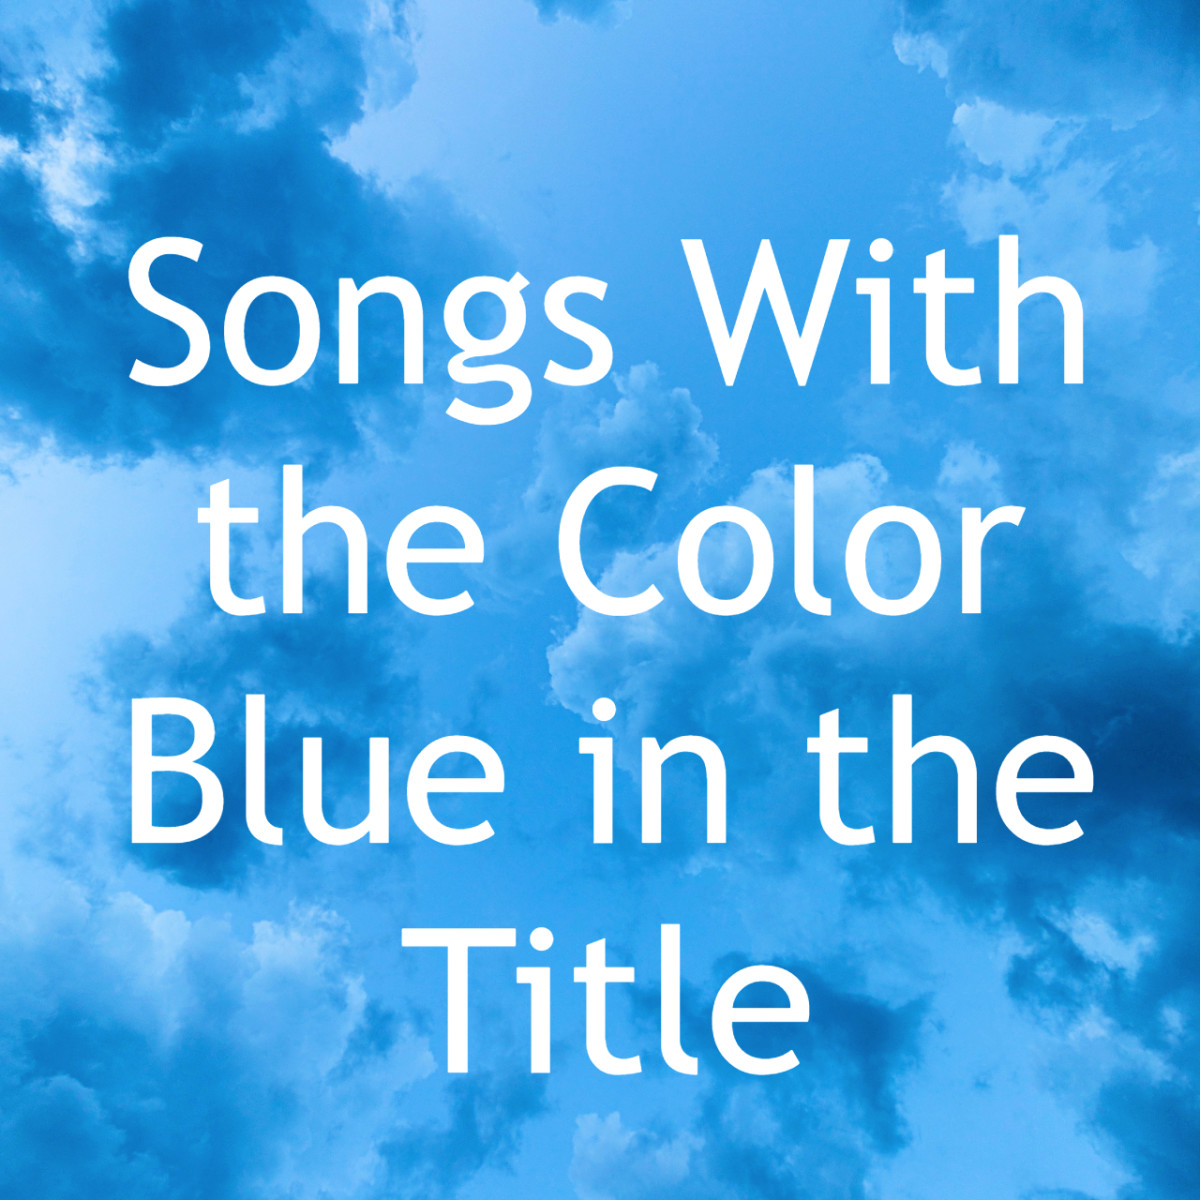 20 Songs About Blue Eyes